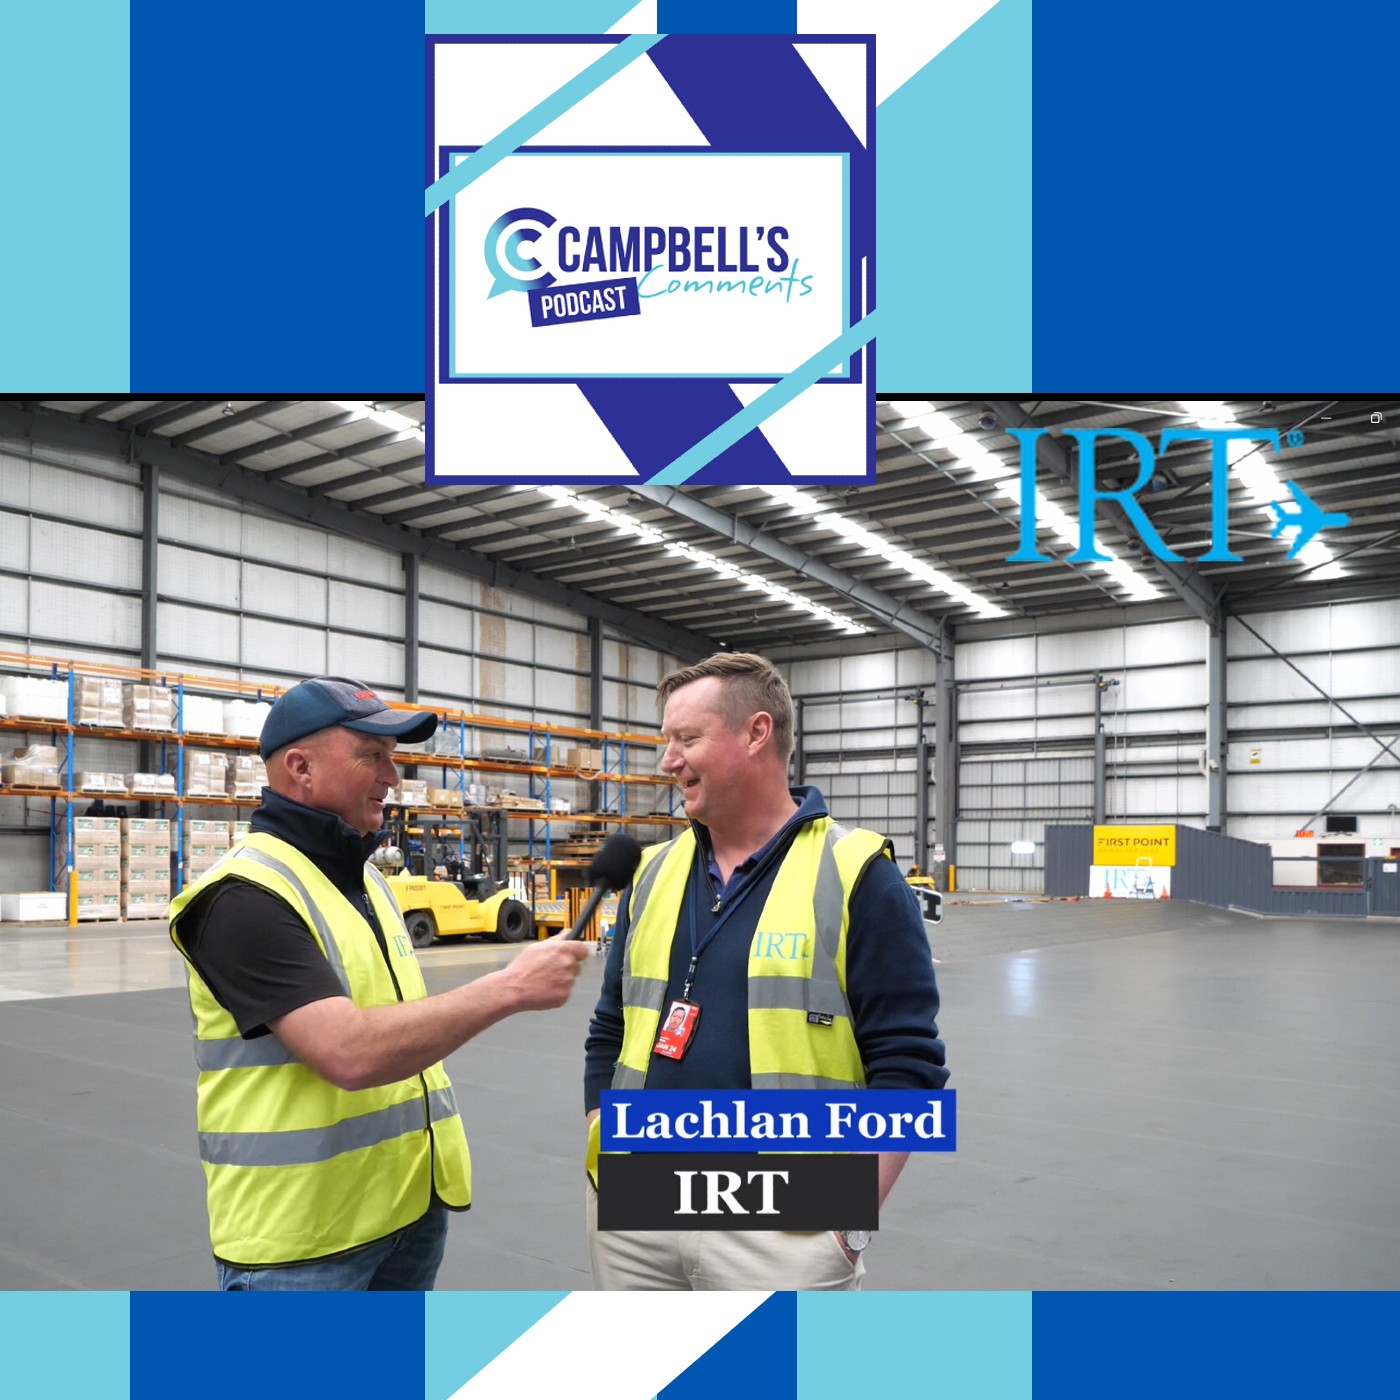 You are currently viewing 269: Campbells Comments with Lachlan Ford from IRT